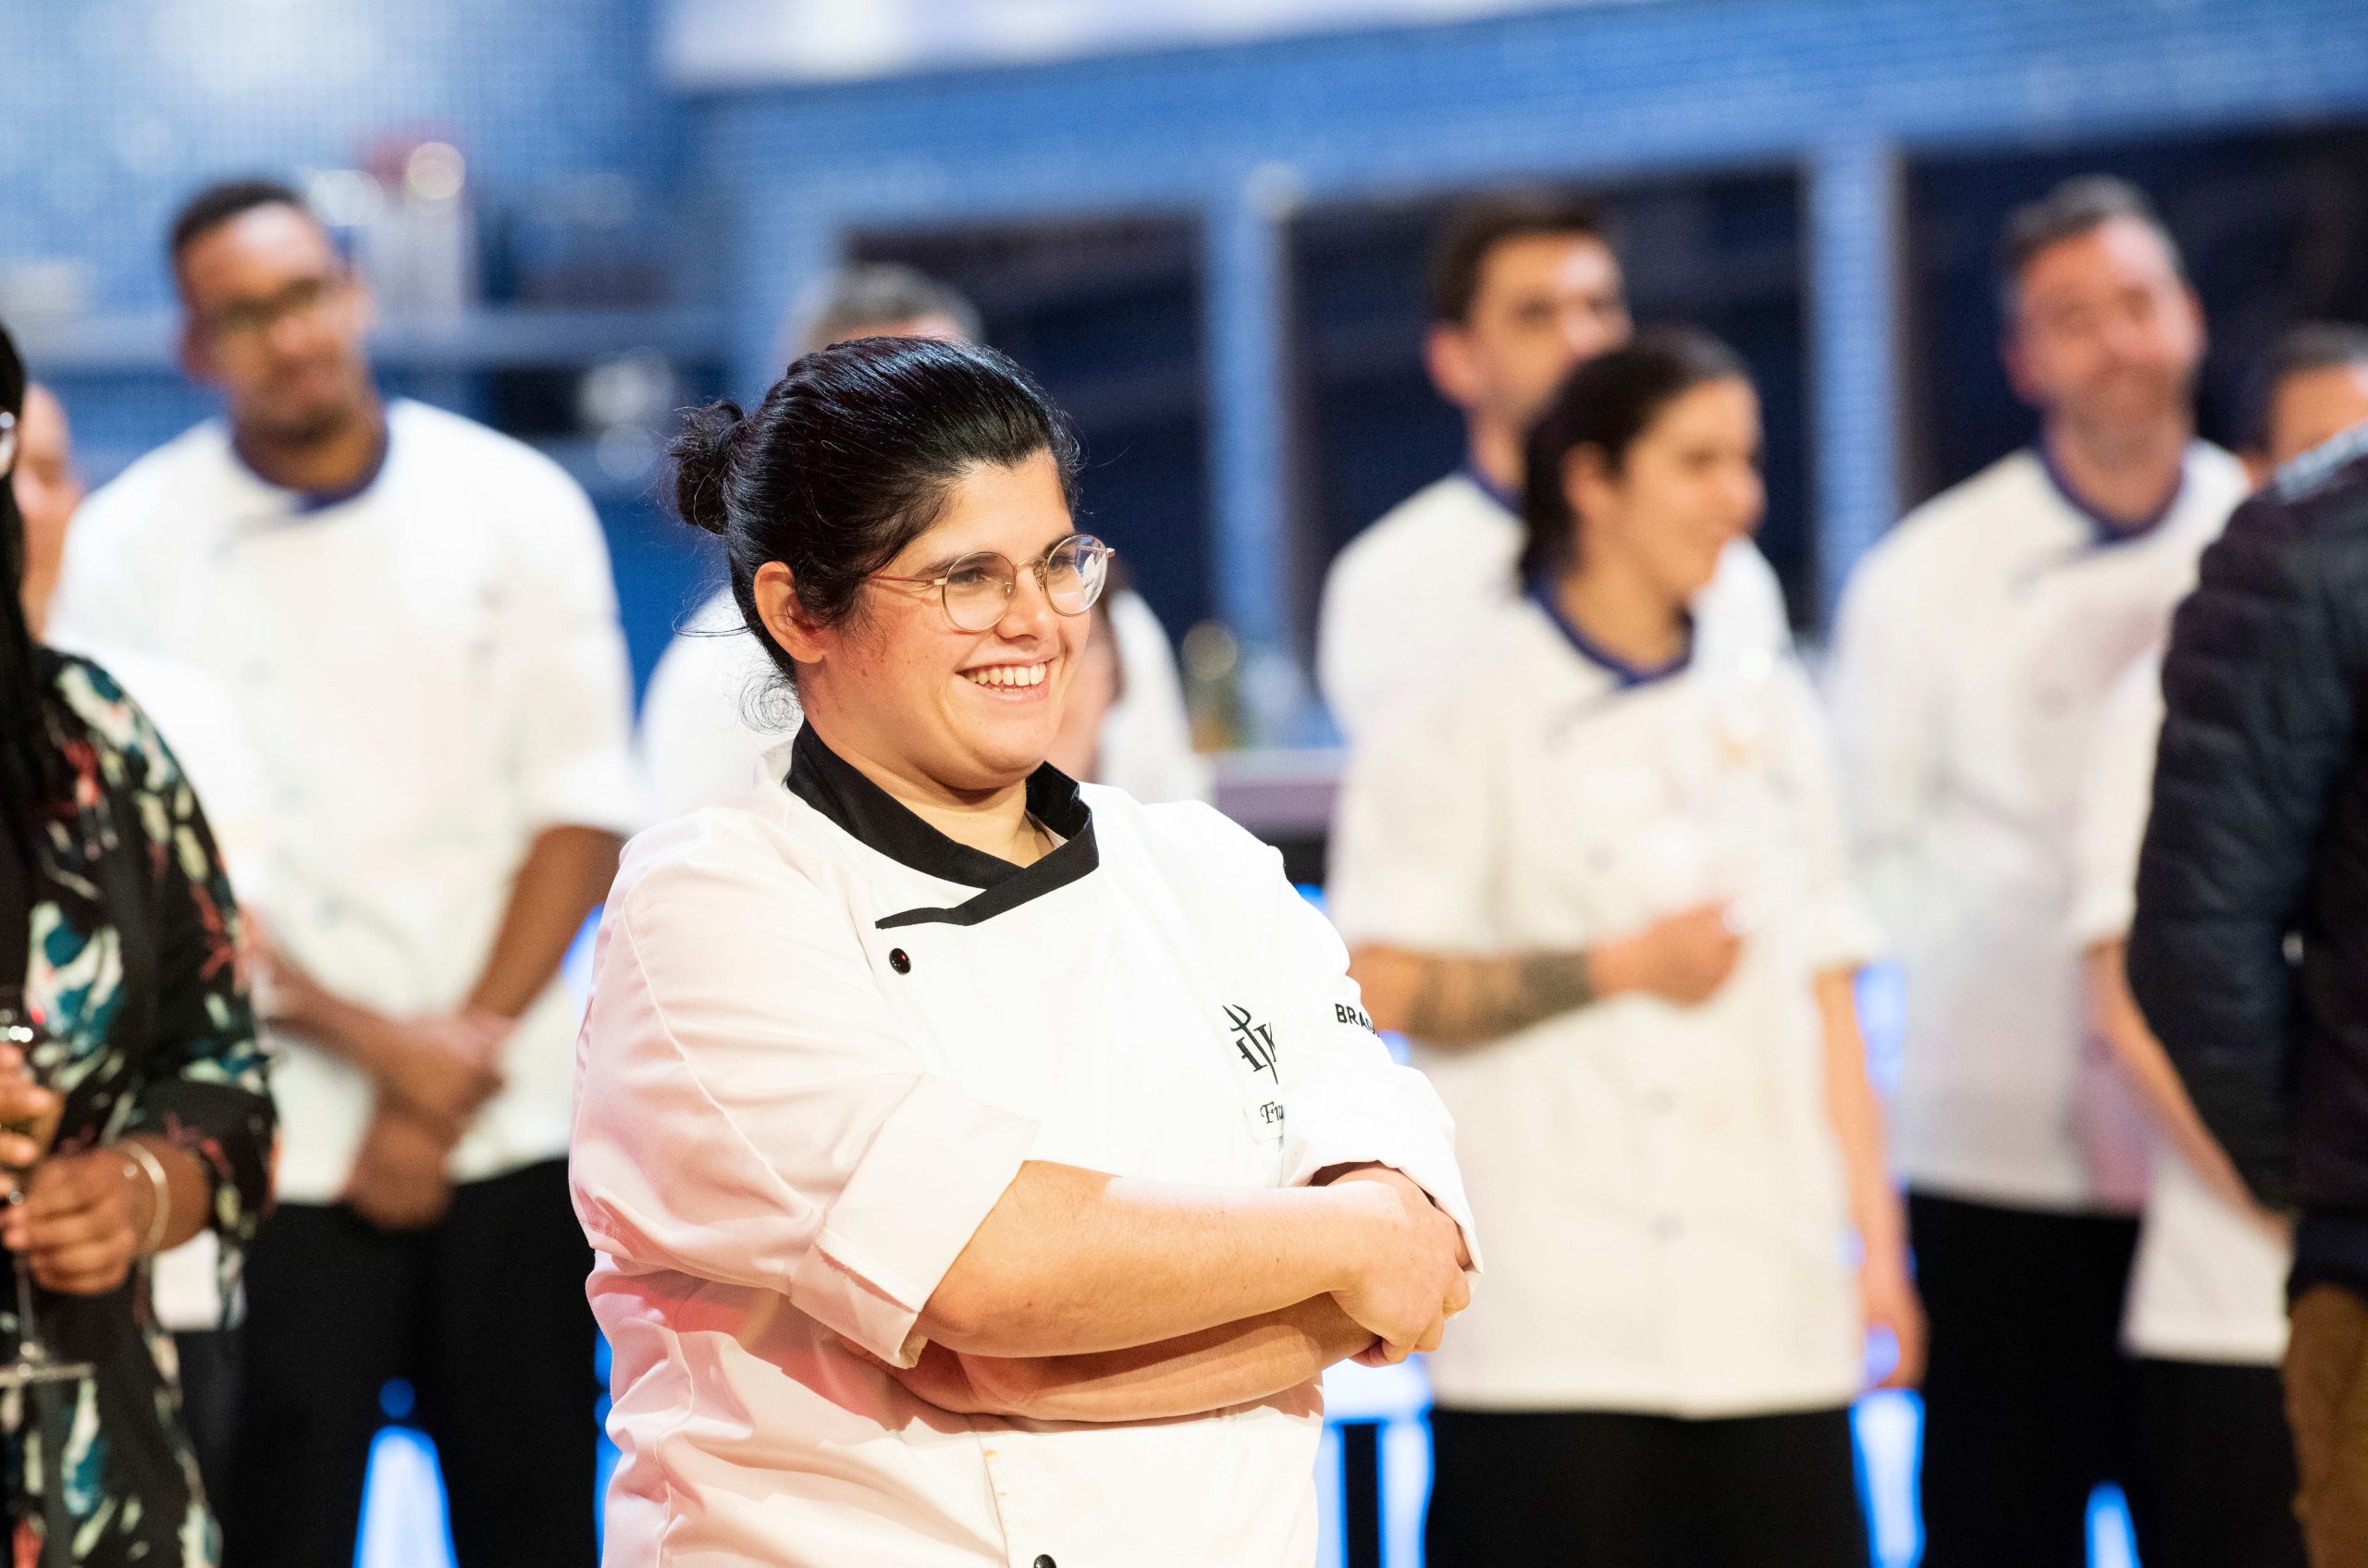 The final of Hell’s Kitchen Portugal becomes the most watched show of the night, absolute prime time leader!